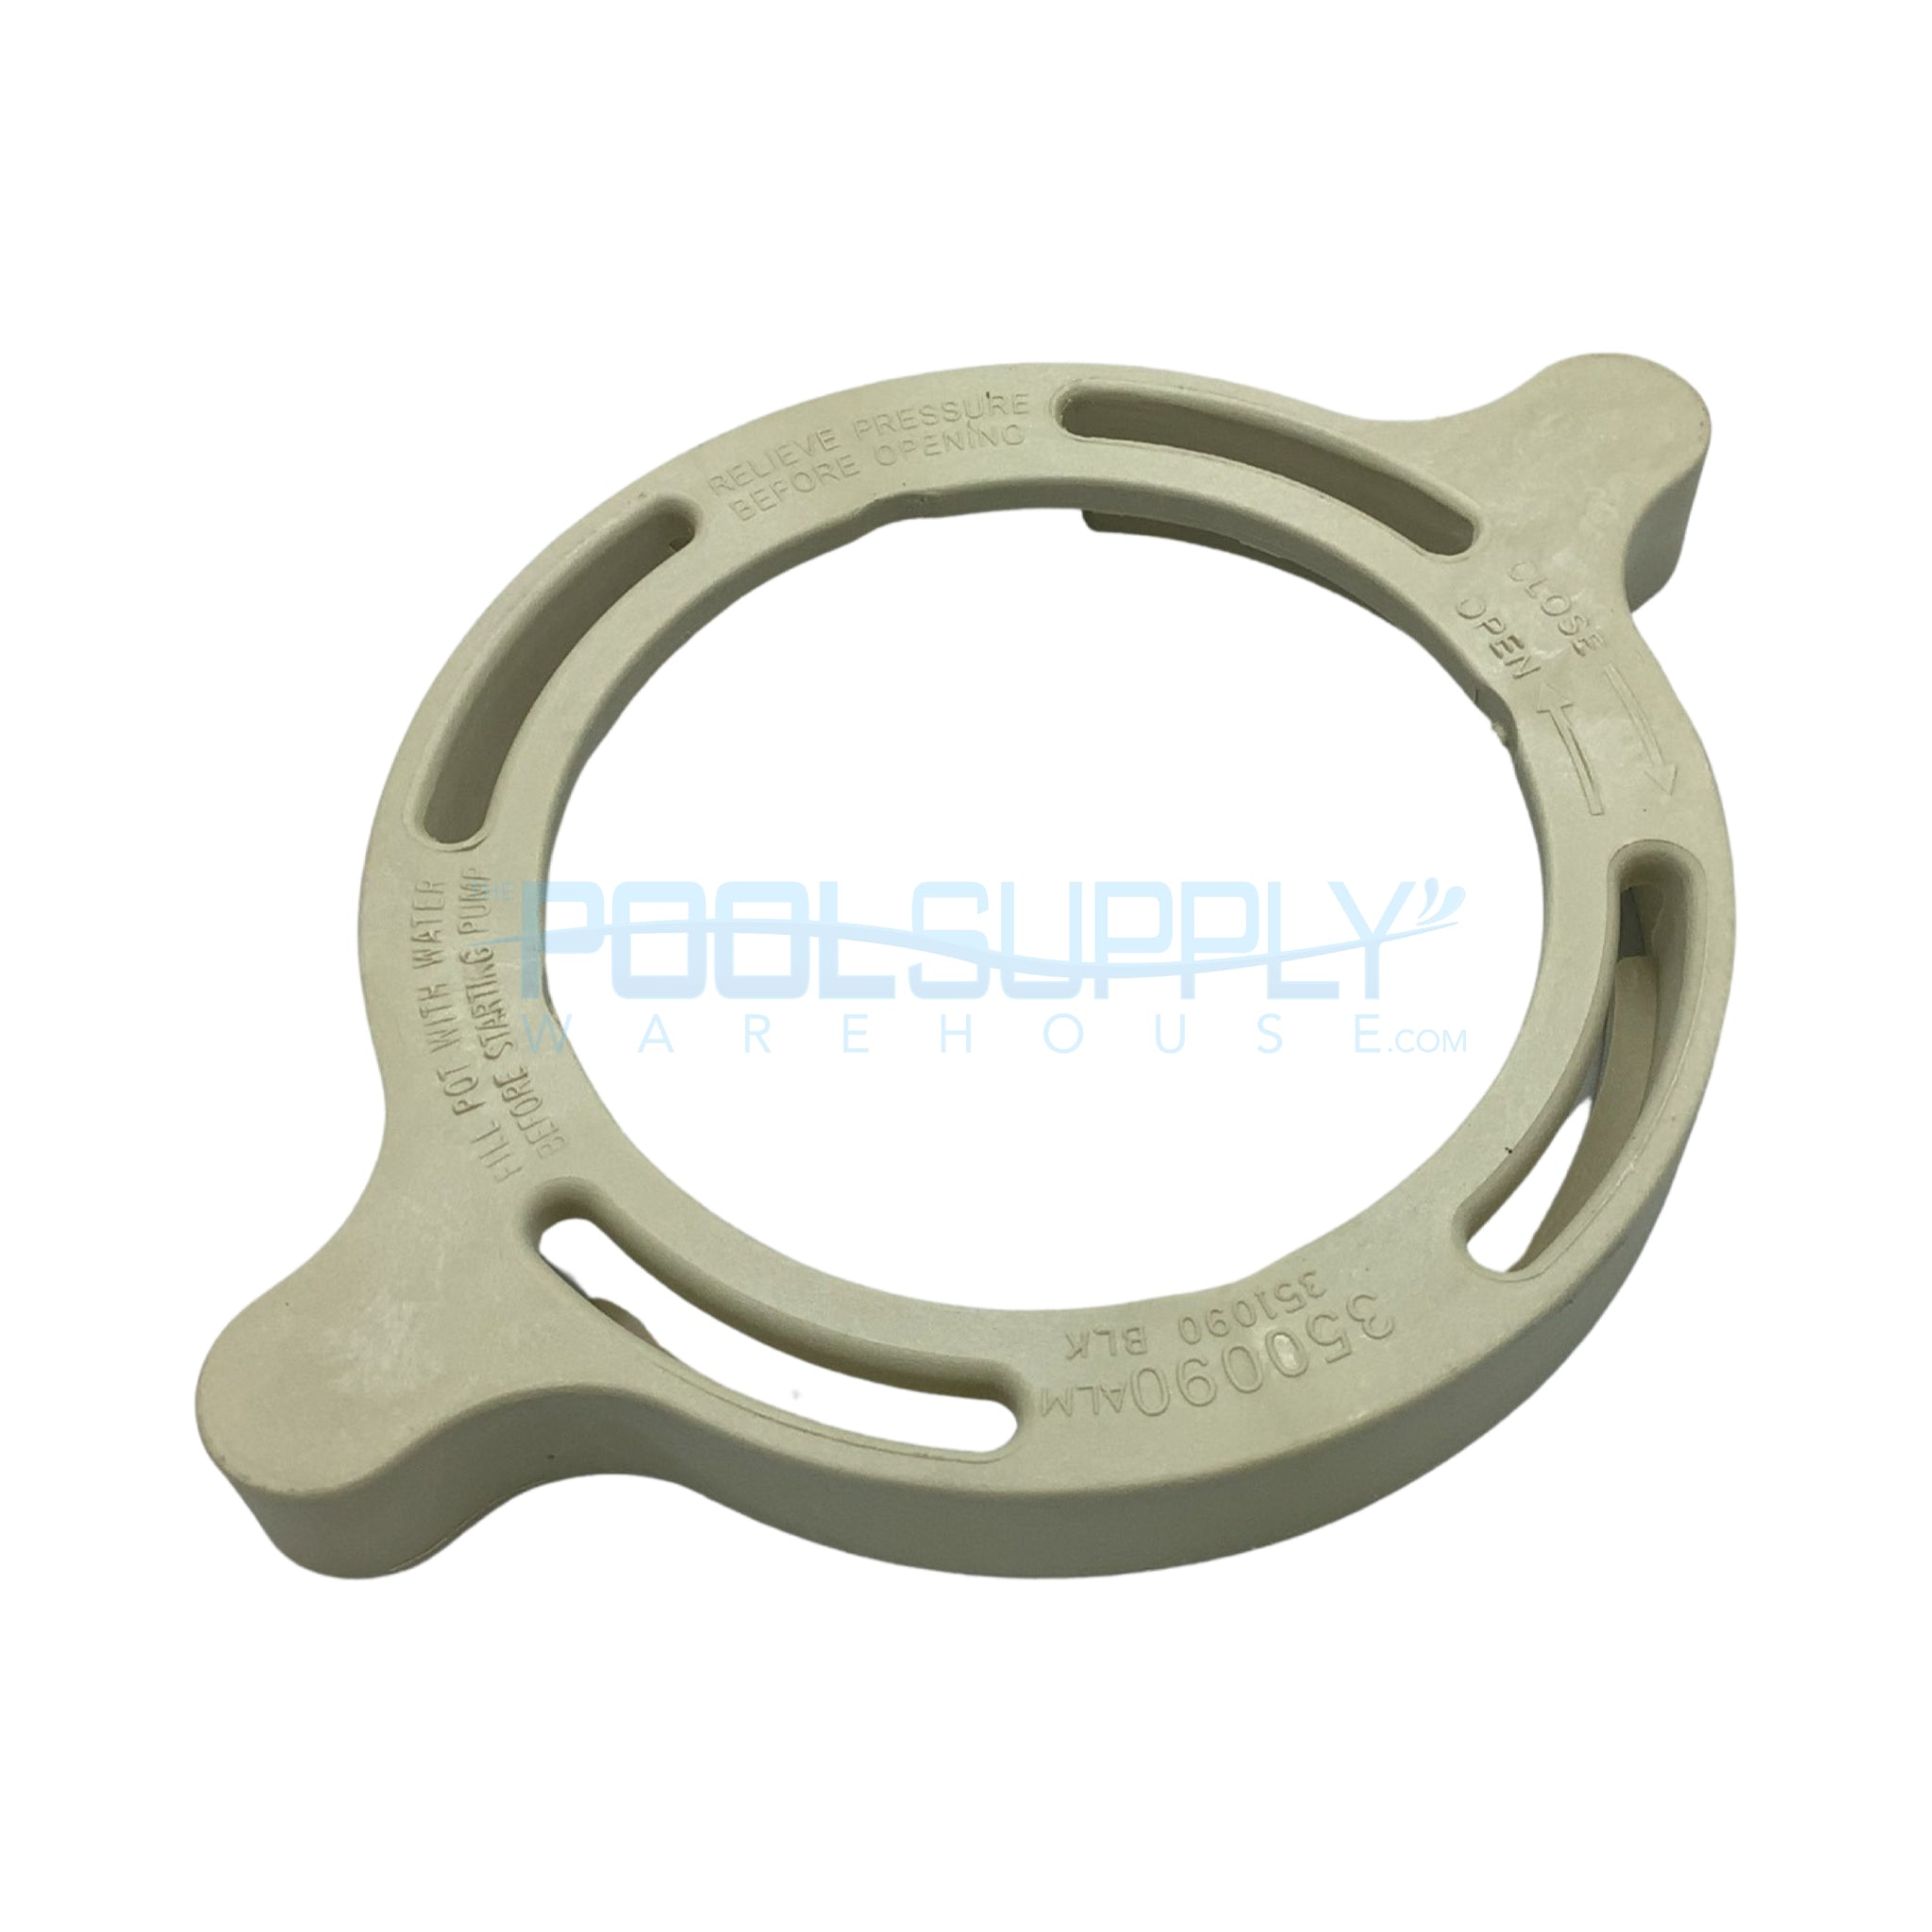 SuperFlo Cam & Ramp Strainer Lid Clamp - 350090 - The Pool Supply Warehouse